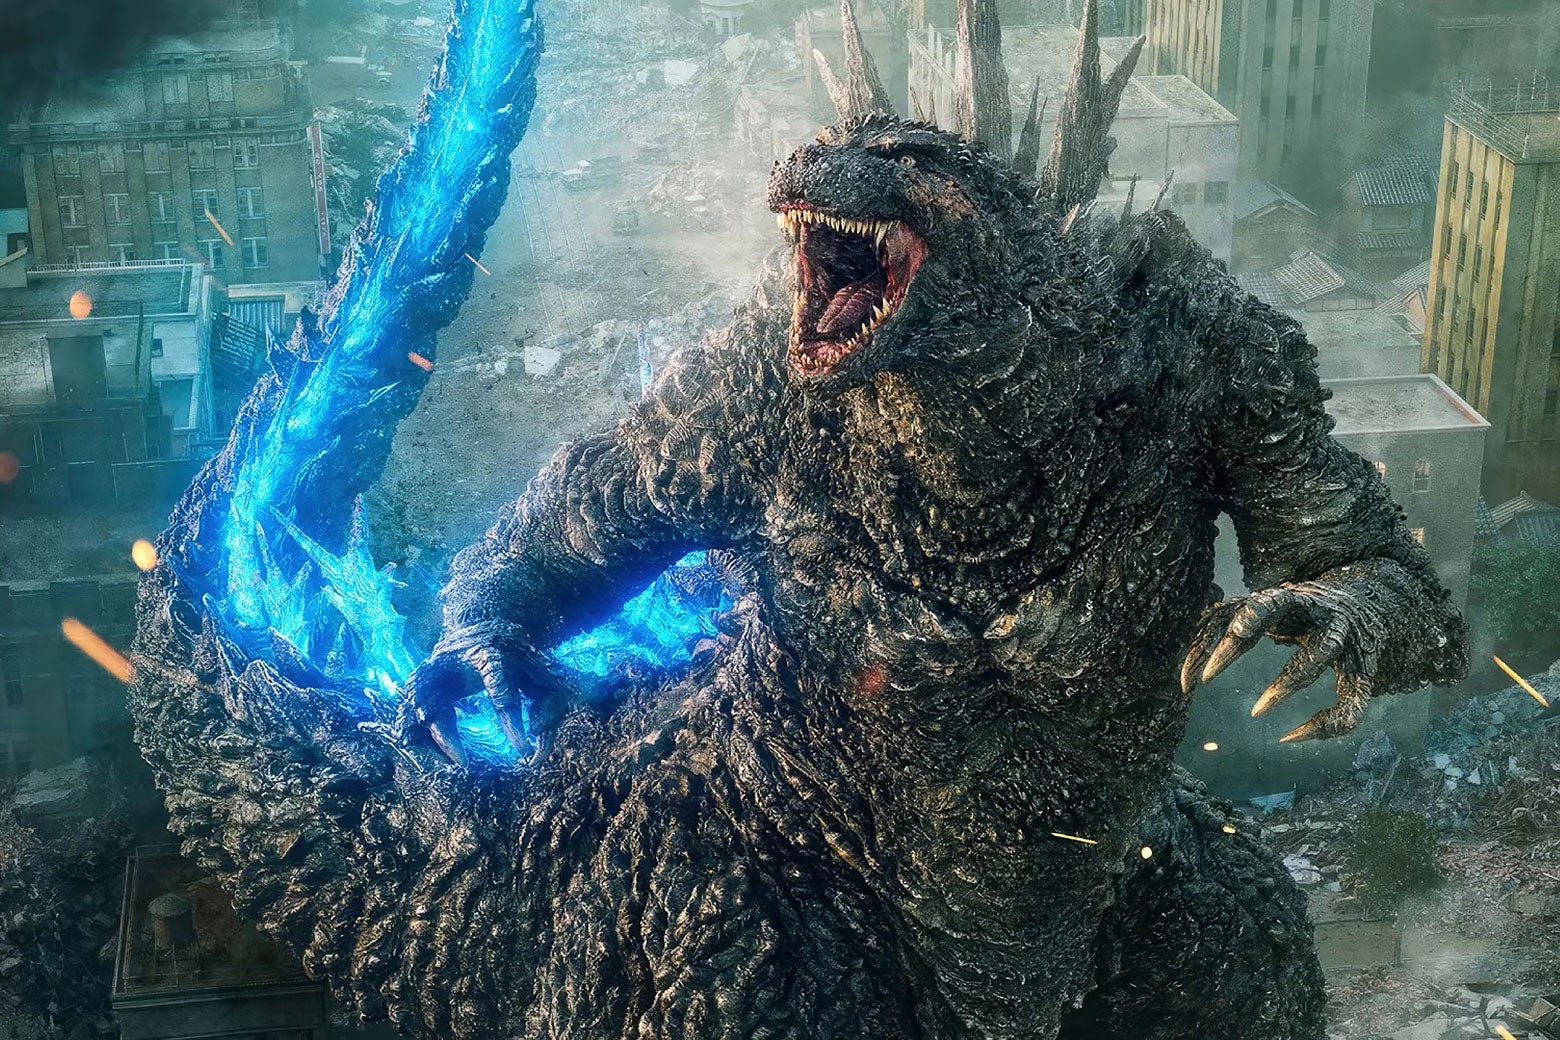 Godzilla Minus One: The remarkable monster movie tearing up the box office.